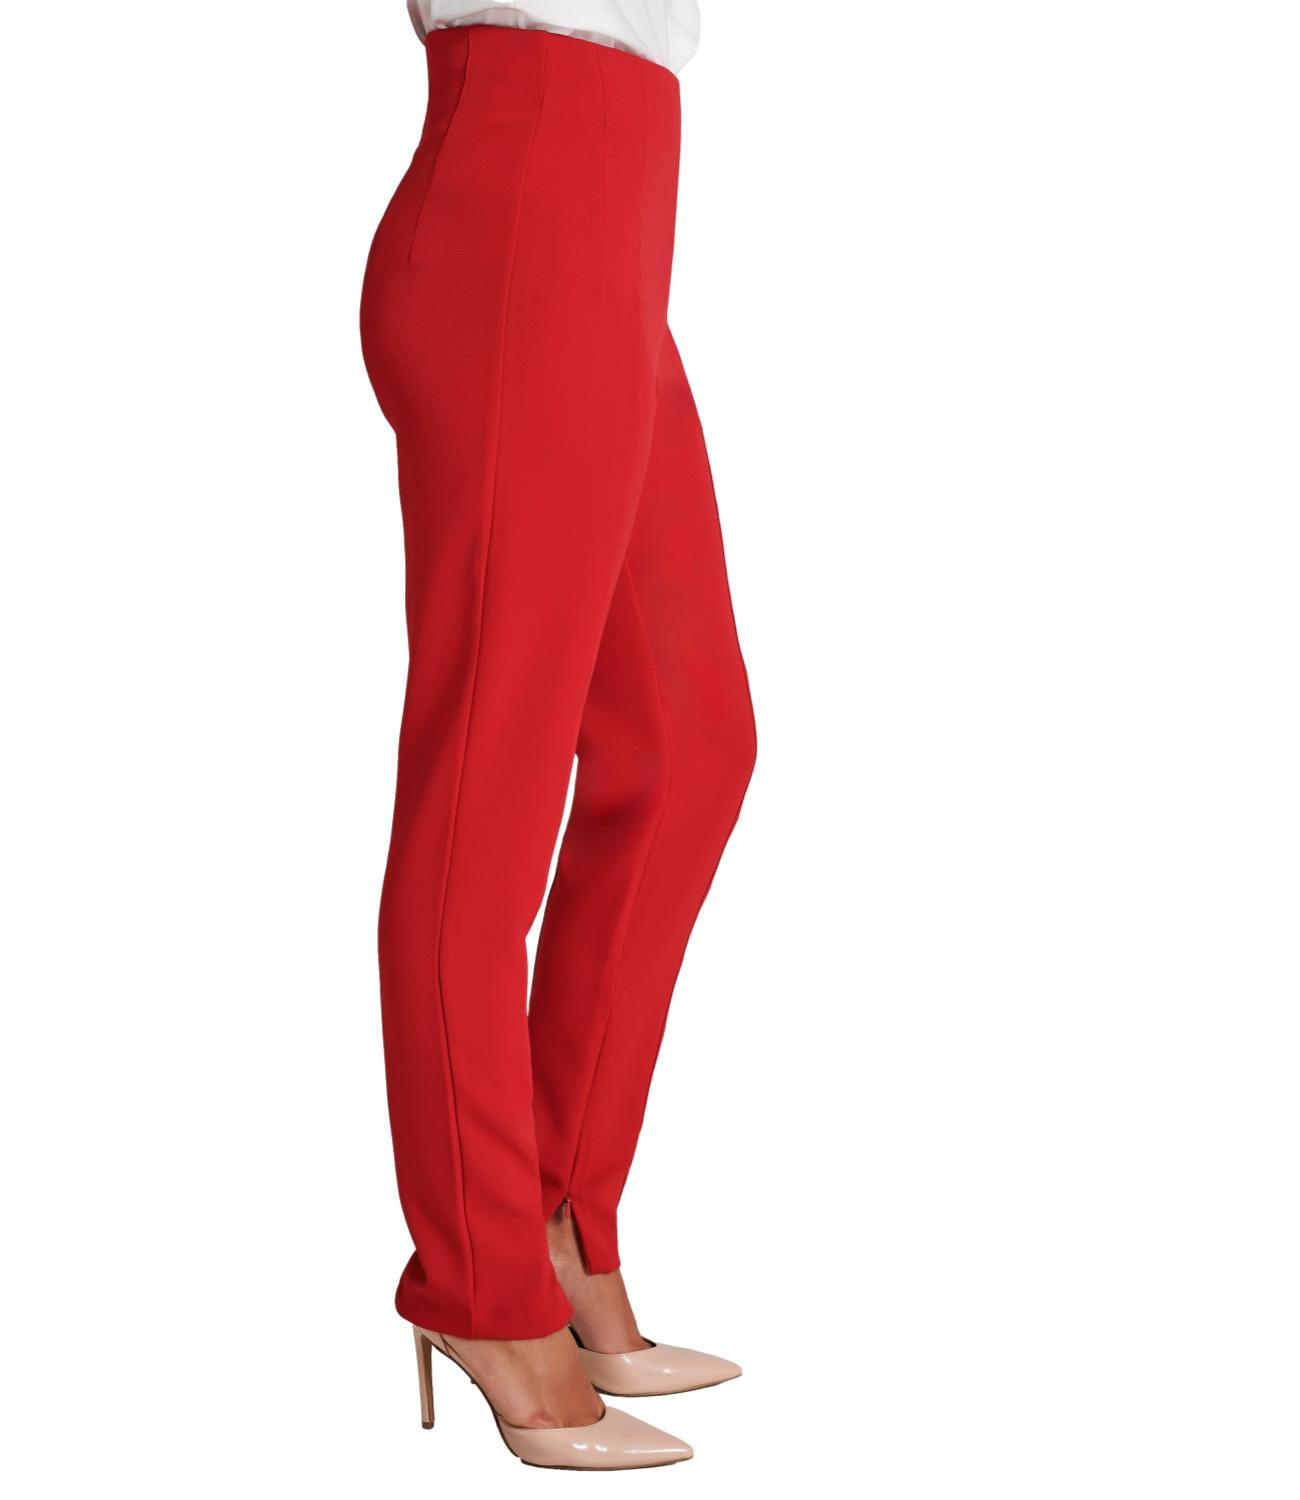 Women's red trousers